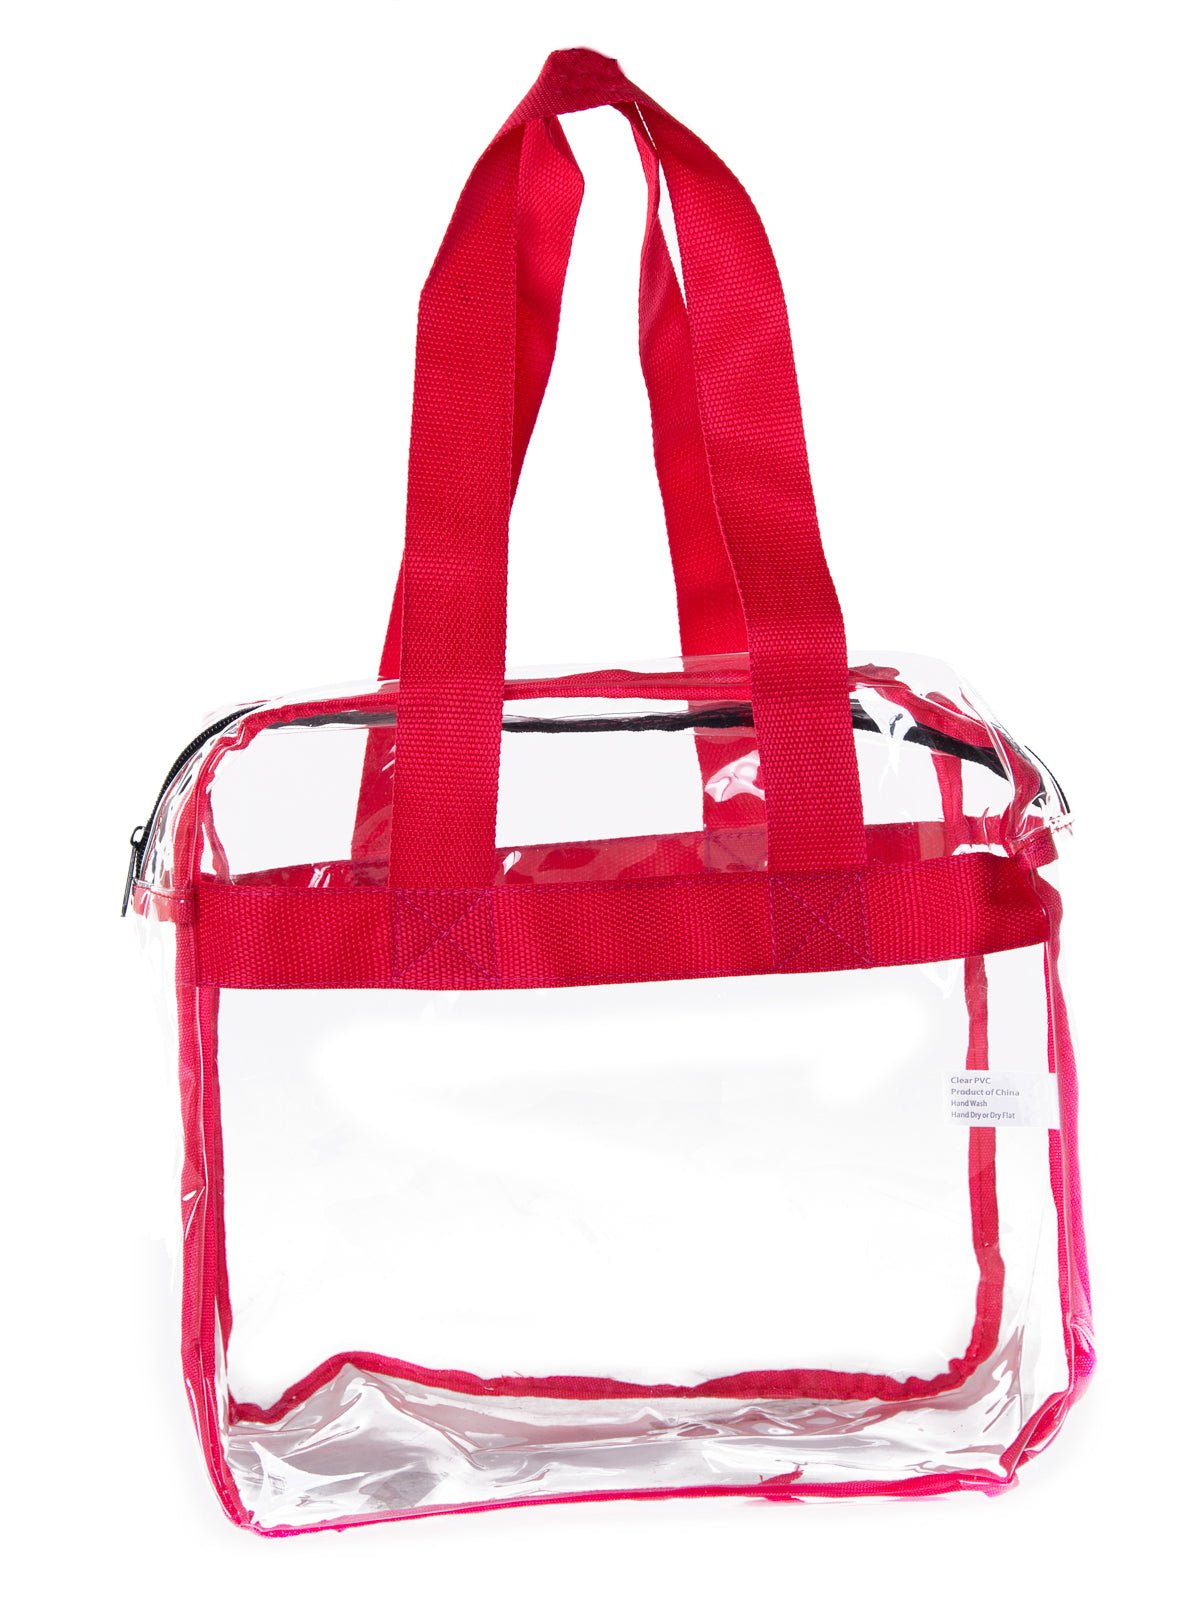 Clear Stadium Approved Tote Bag - Mato & Hash